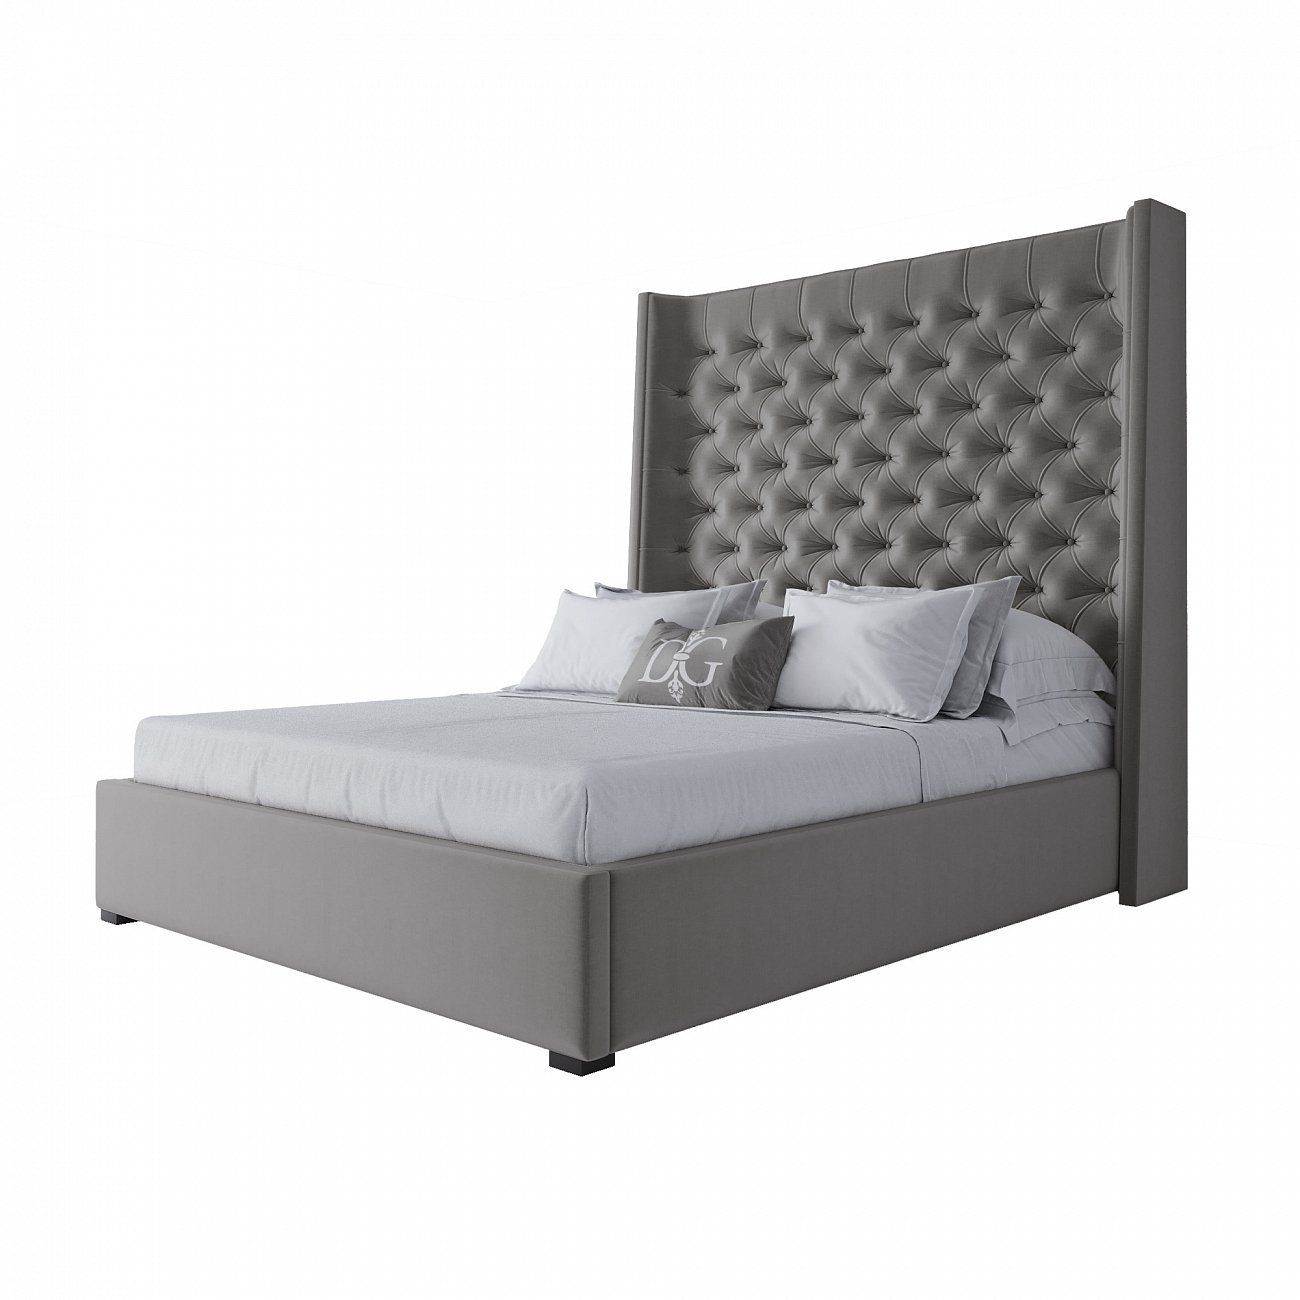 Double bed 160x200 grey velour Jackie King